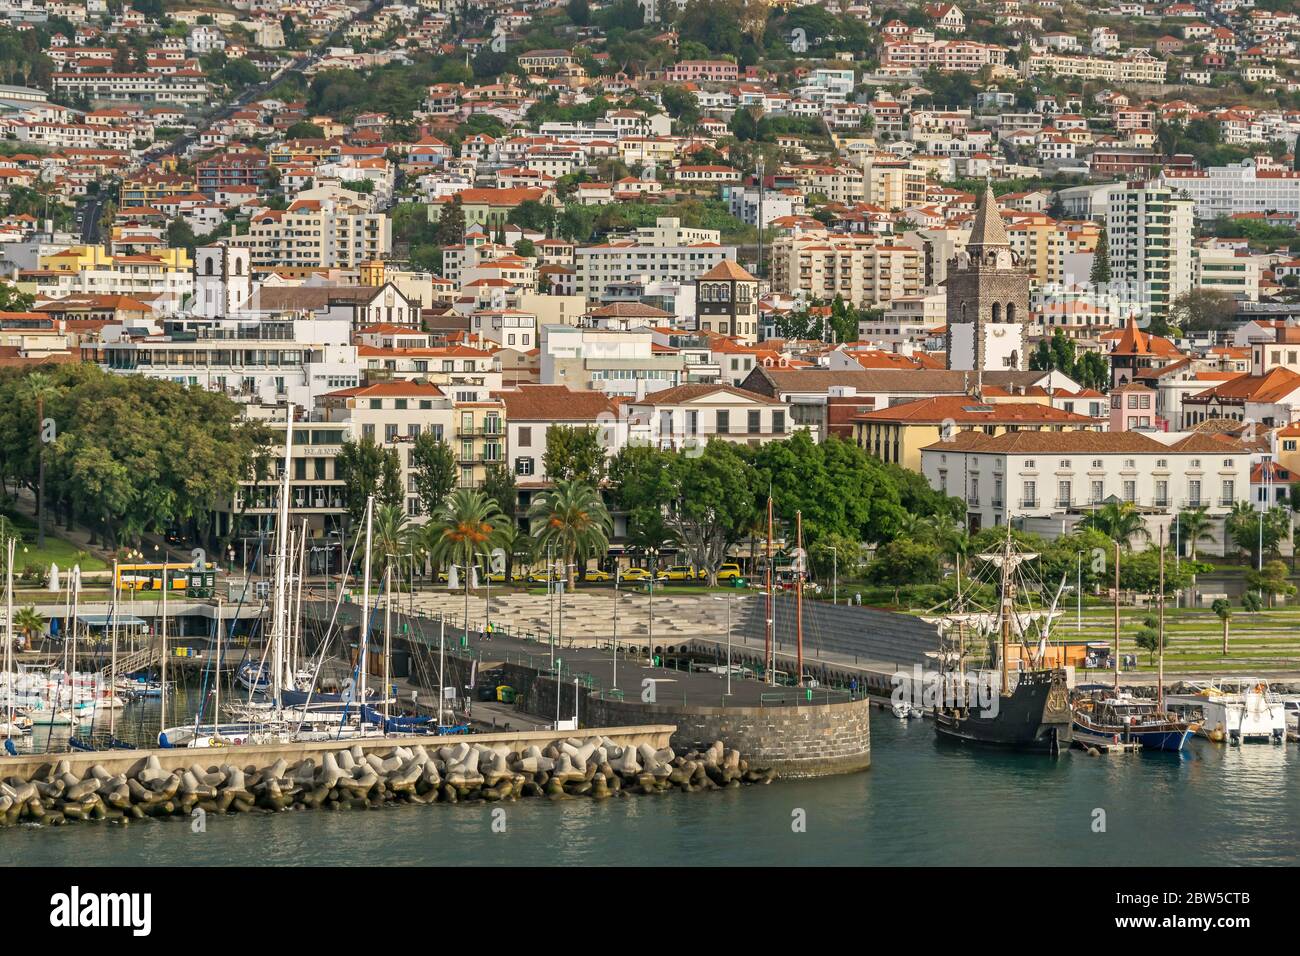 Cityscape of Funchal with its historic center and Cathedral of Funchal (Sé Cathedral), functional replica of Columbus' flagship Santa María, seaside p Stock Photo